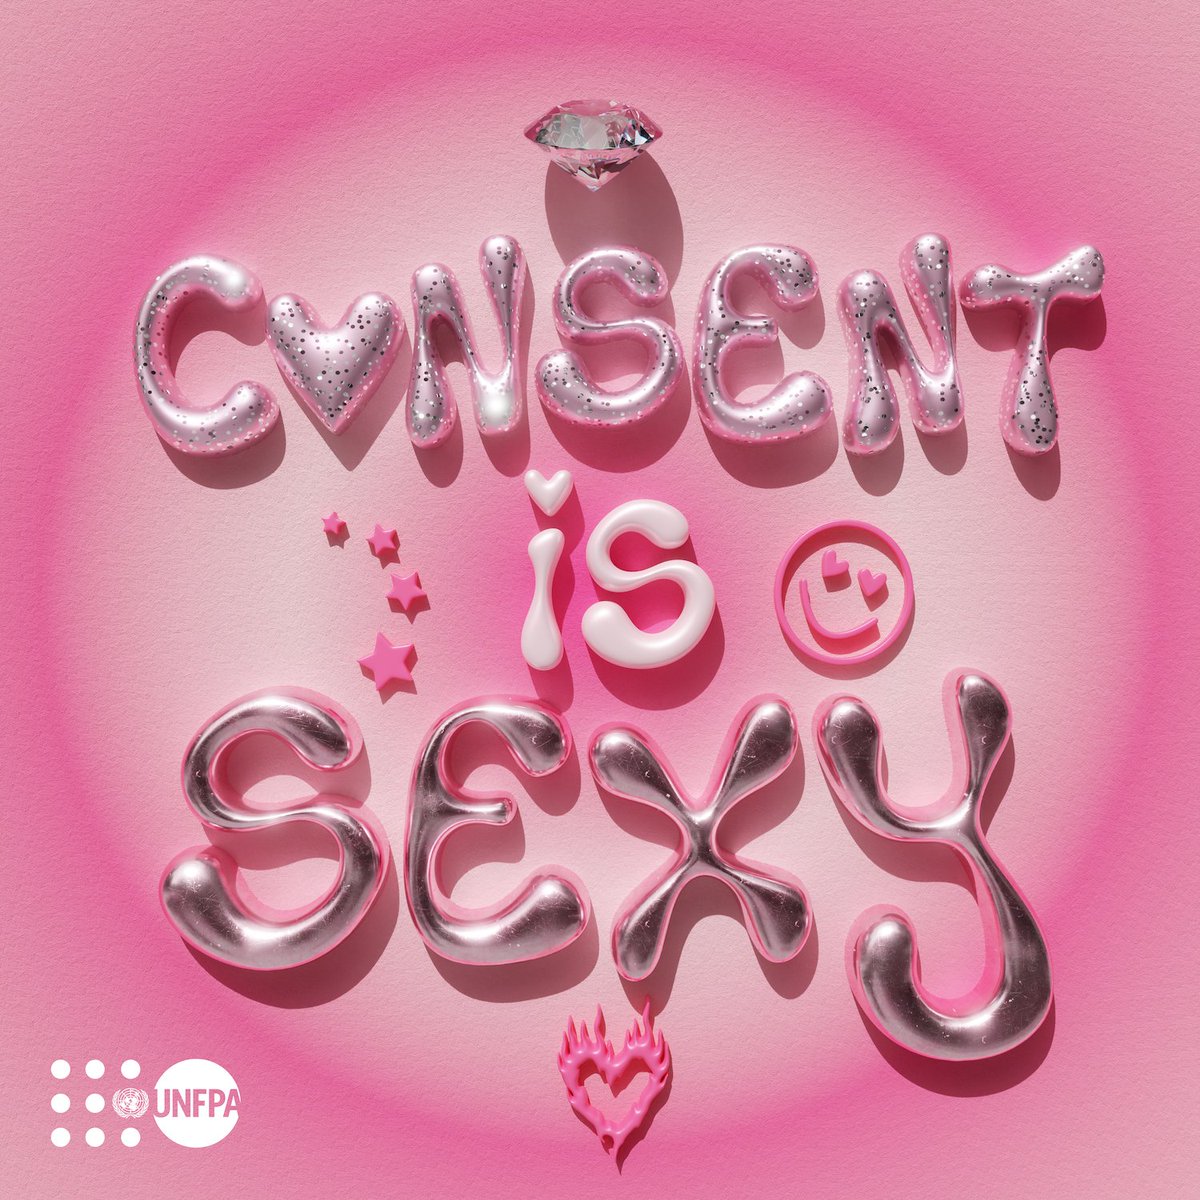 Consent isn’t just sexy, it’s mandatory!

Let’s end the harmful idea that seeking #consent will “ruin the mood” or “kill the moment”.

Consent can and should be enthusiastic, exciting and fun.

Drop a 💯 if you agree and learn more: unf.pa/consent

#WorldSexualHealthDay